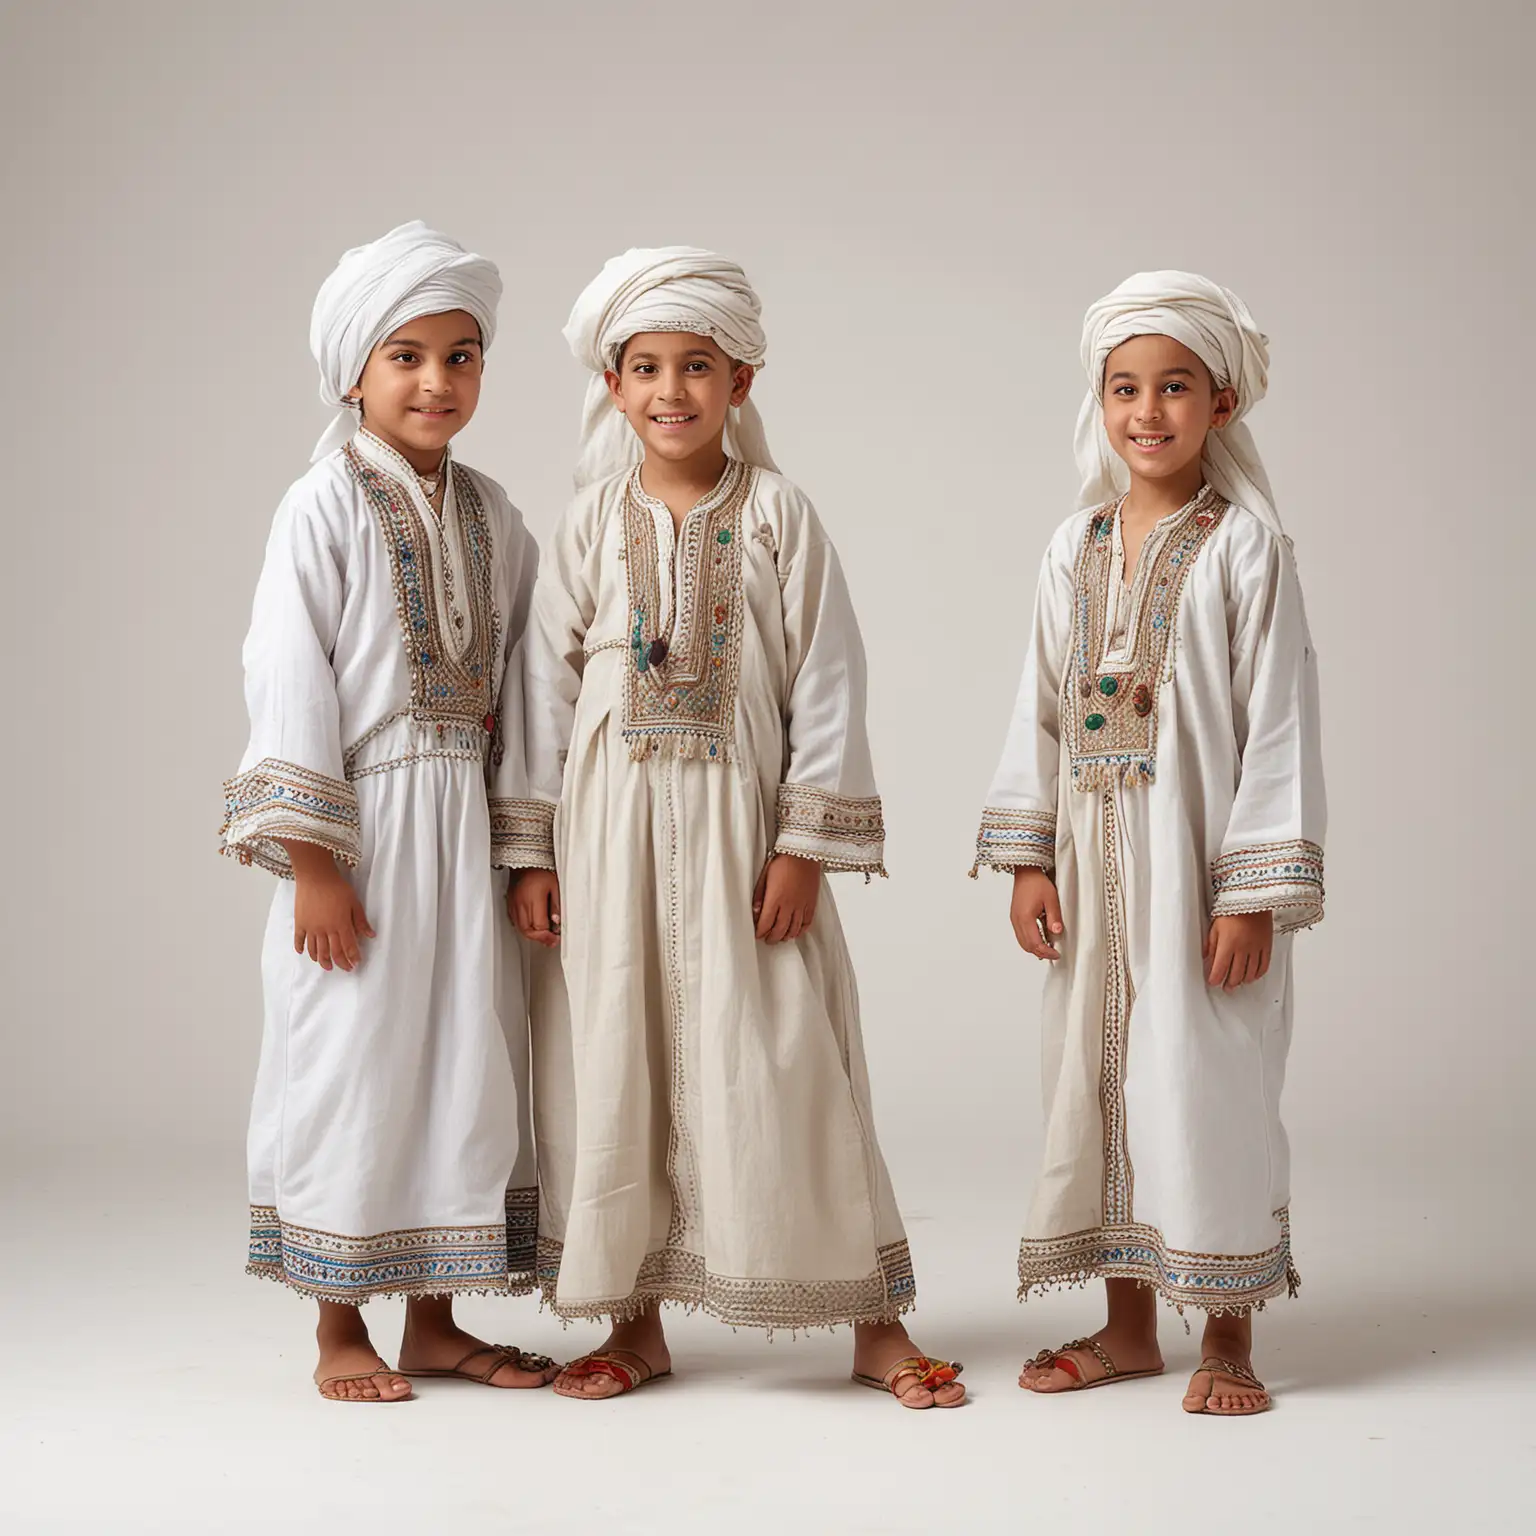 Moroccan Children Playing in Traditional Attire on White Background